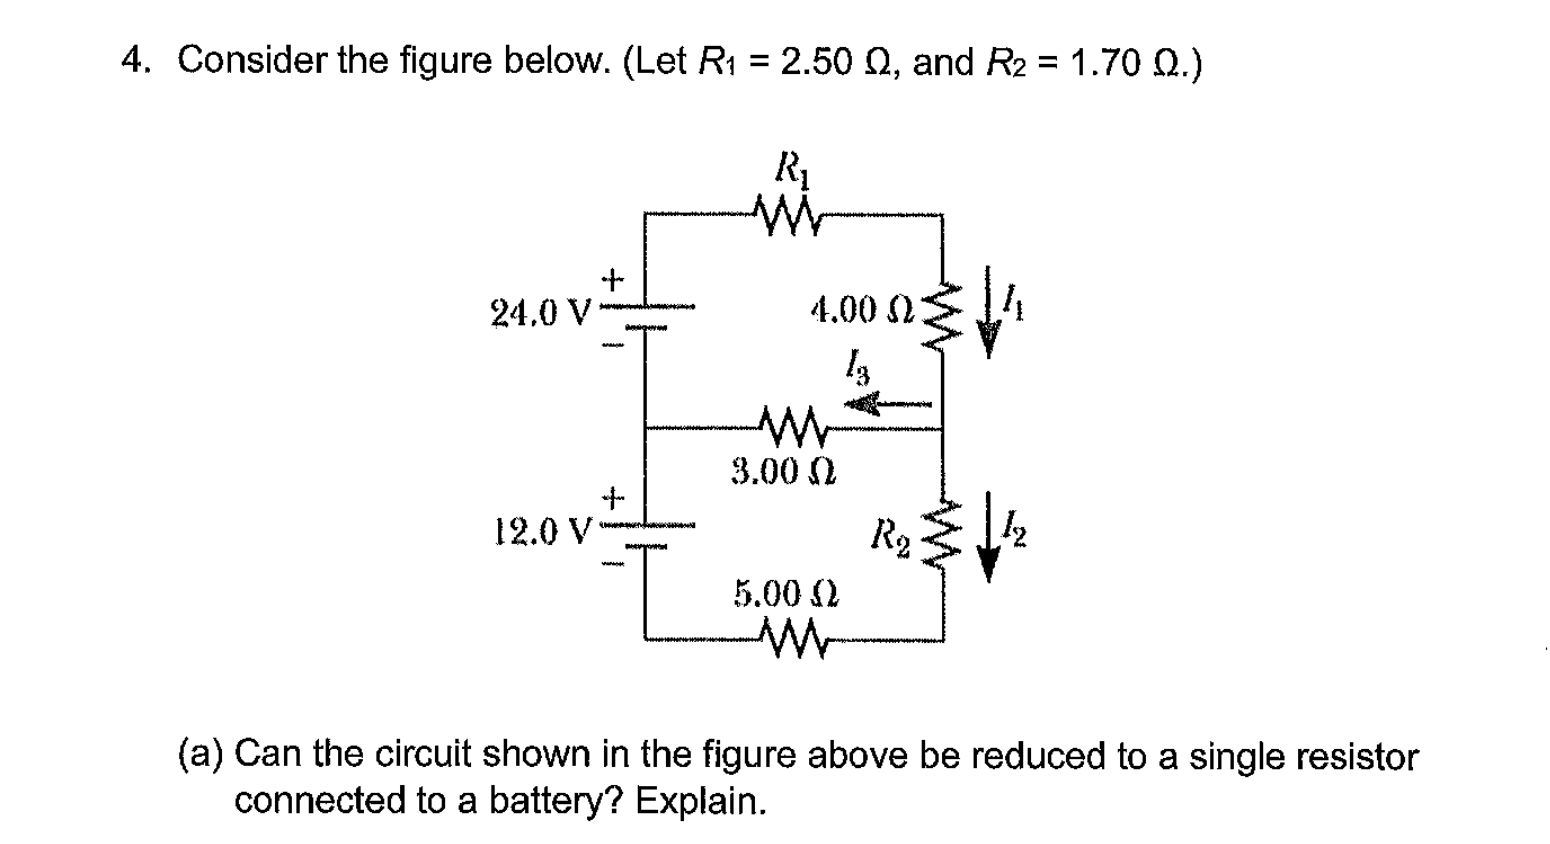 4. Consider the figure below. (Let R1 = 2.50 0, and R2 = 1.70 Q.)
R1
24,0 V
4.00 2:
3.00 N
12.0 V
R2
5.00 2
(a) Can the circuit shown in the figure above be reduced to a single resistor
connected to a battery? Explain.
